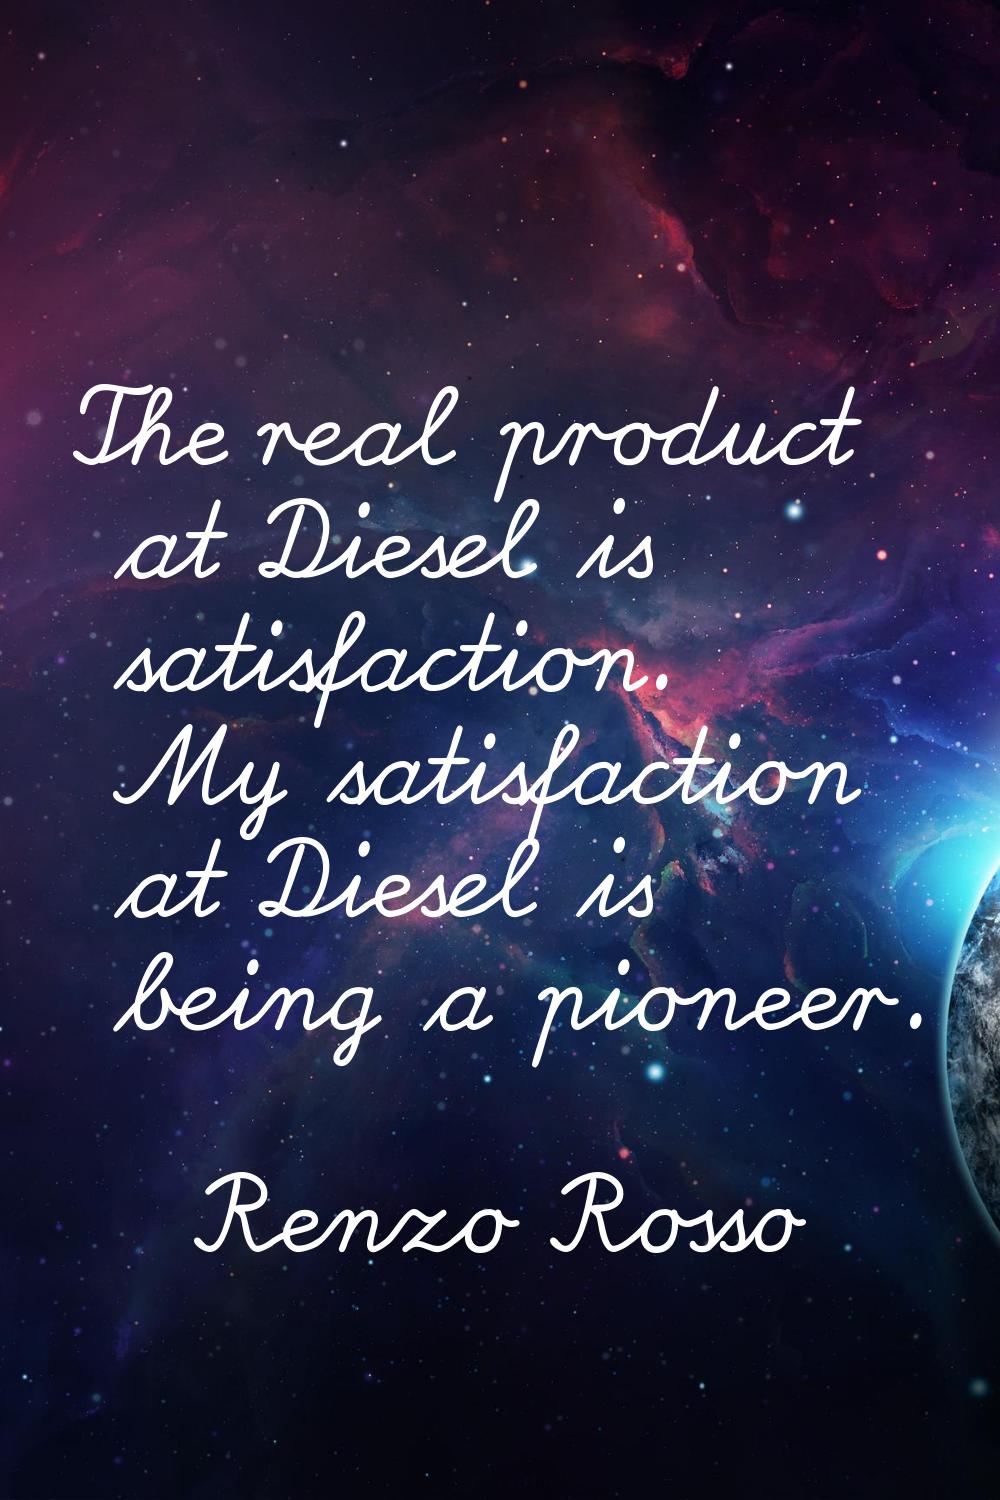 The real product at Diesel is satisfaction. My satisfaction at Diesel is being a pioneer.